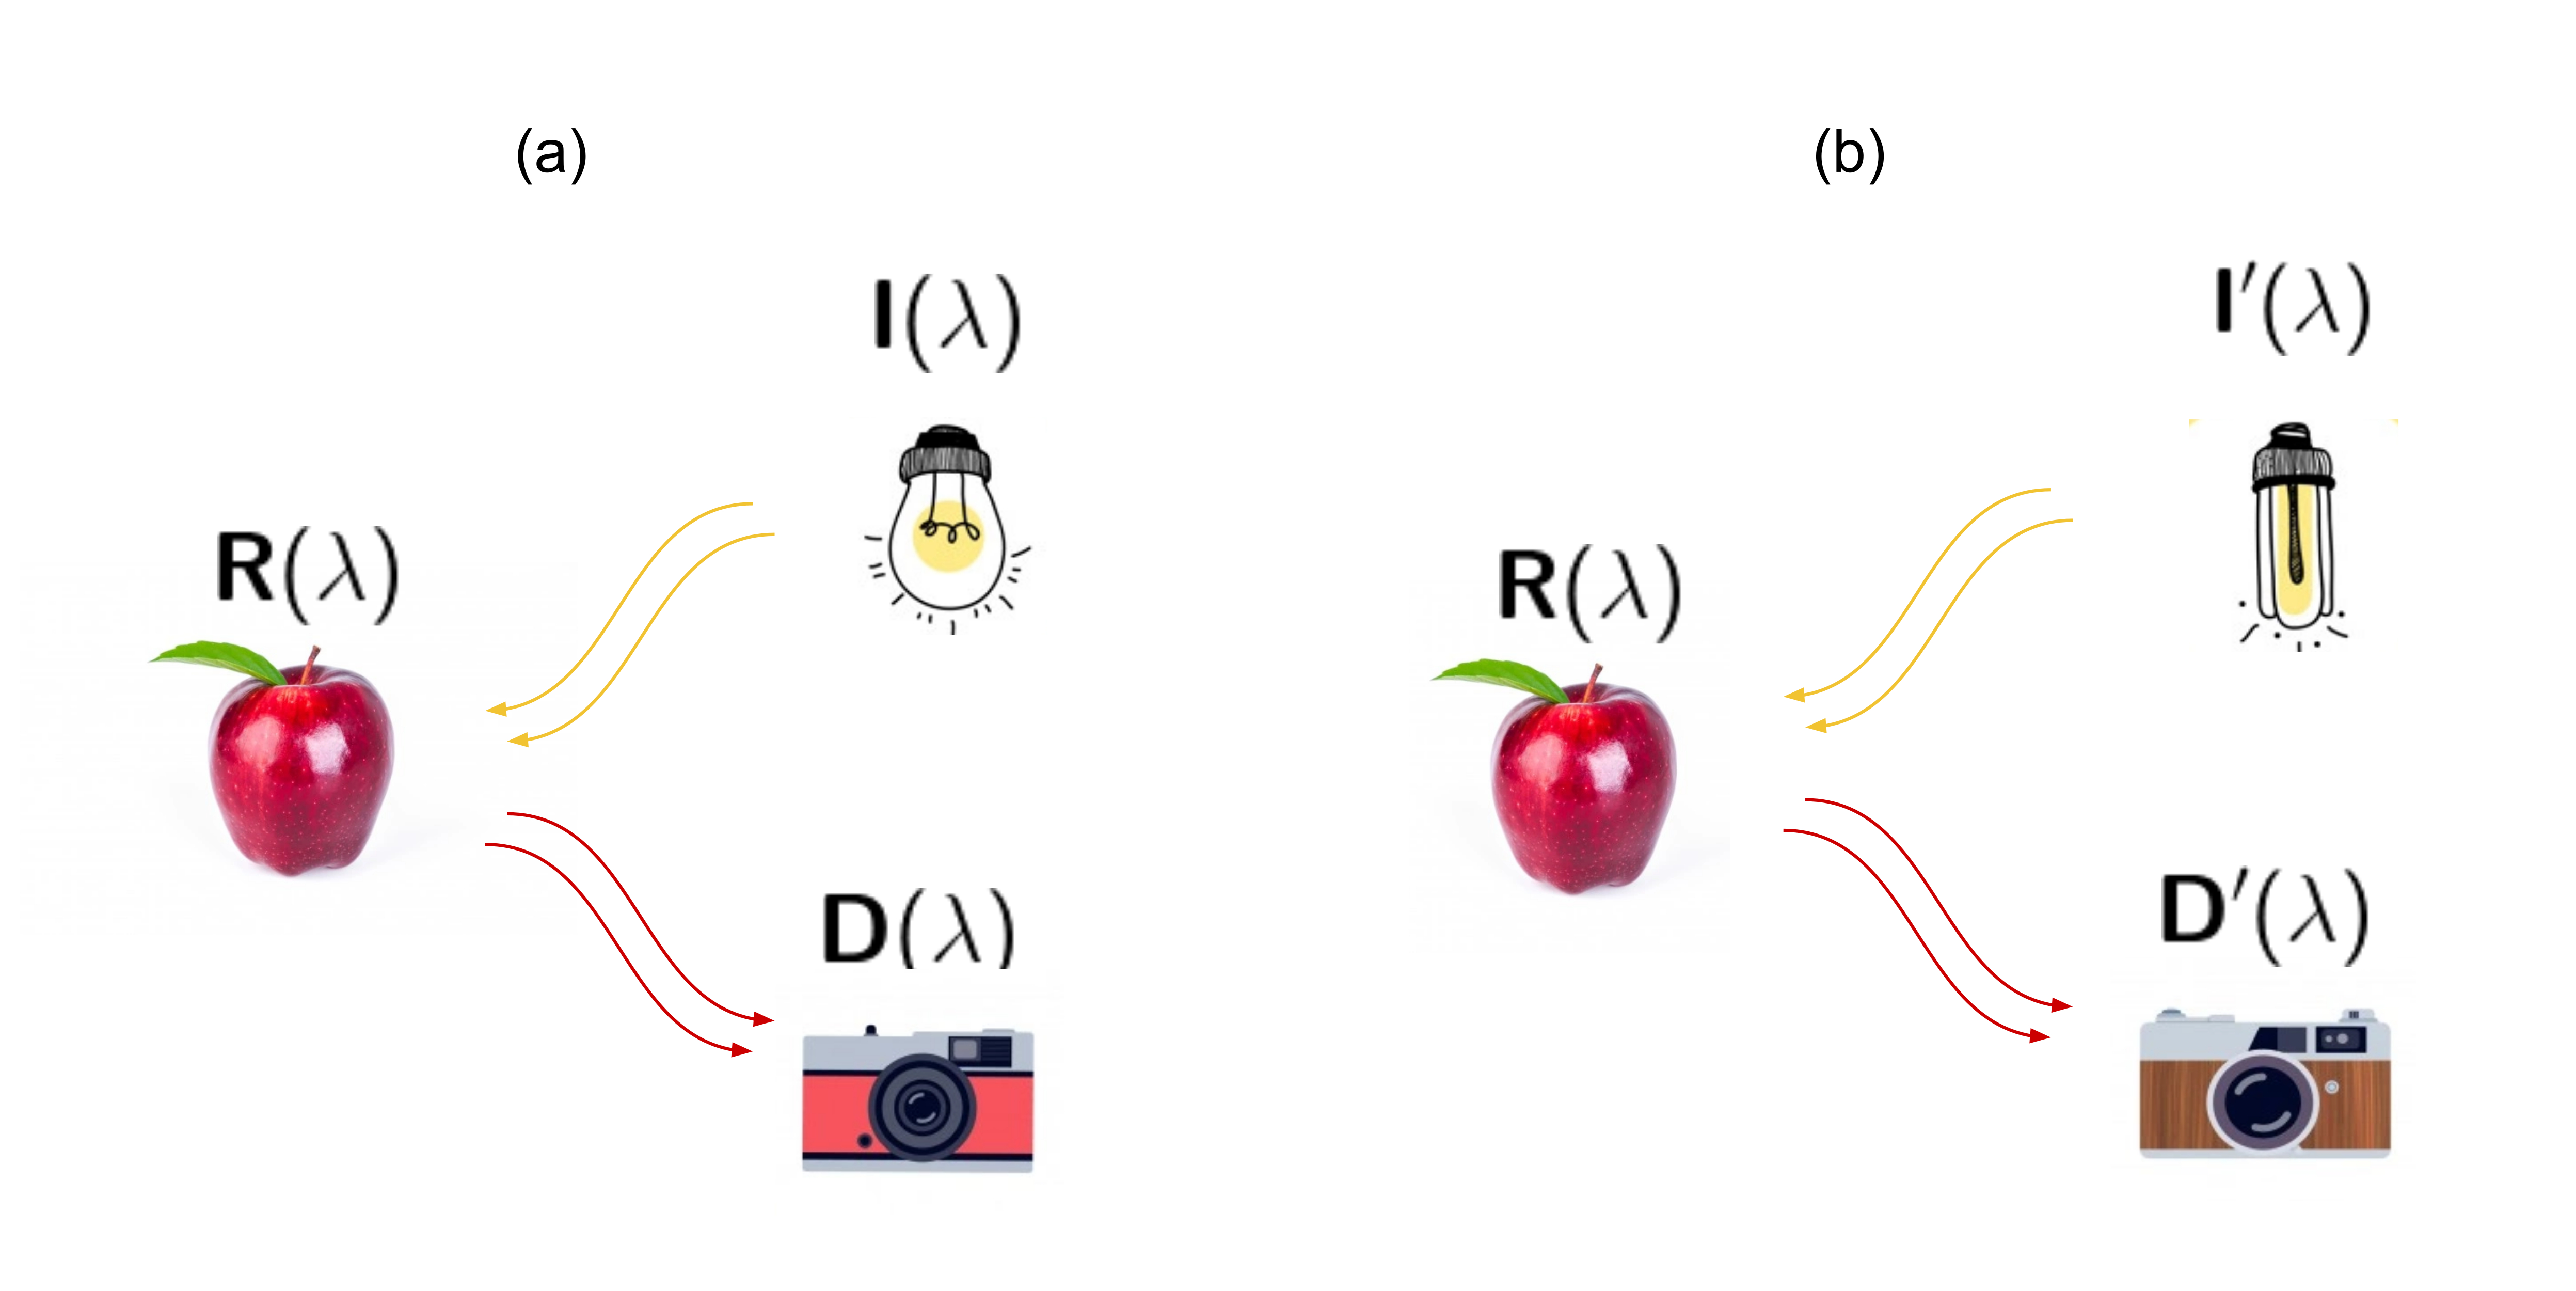 The imaging consistency problem: (a) a certain light source (\mathrm{I} (\uplambda)) illuminates a certain object with a certain reflectance (\mathrm{R} (\uplambda)), this scene is captured by a certain camera with its sensor response (\mathrm{D} (\uplambda)) and (b) the same object is now illuminated by another light source (\mathrm{I'} (\uplambda)) and captured by another camera (\mathrm{D'} (\uplambda)). 